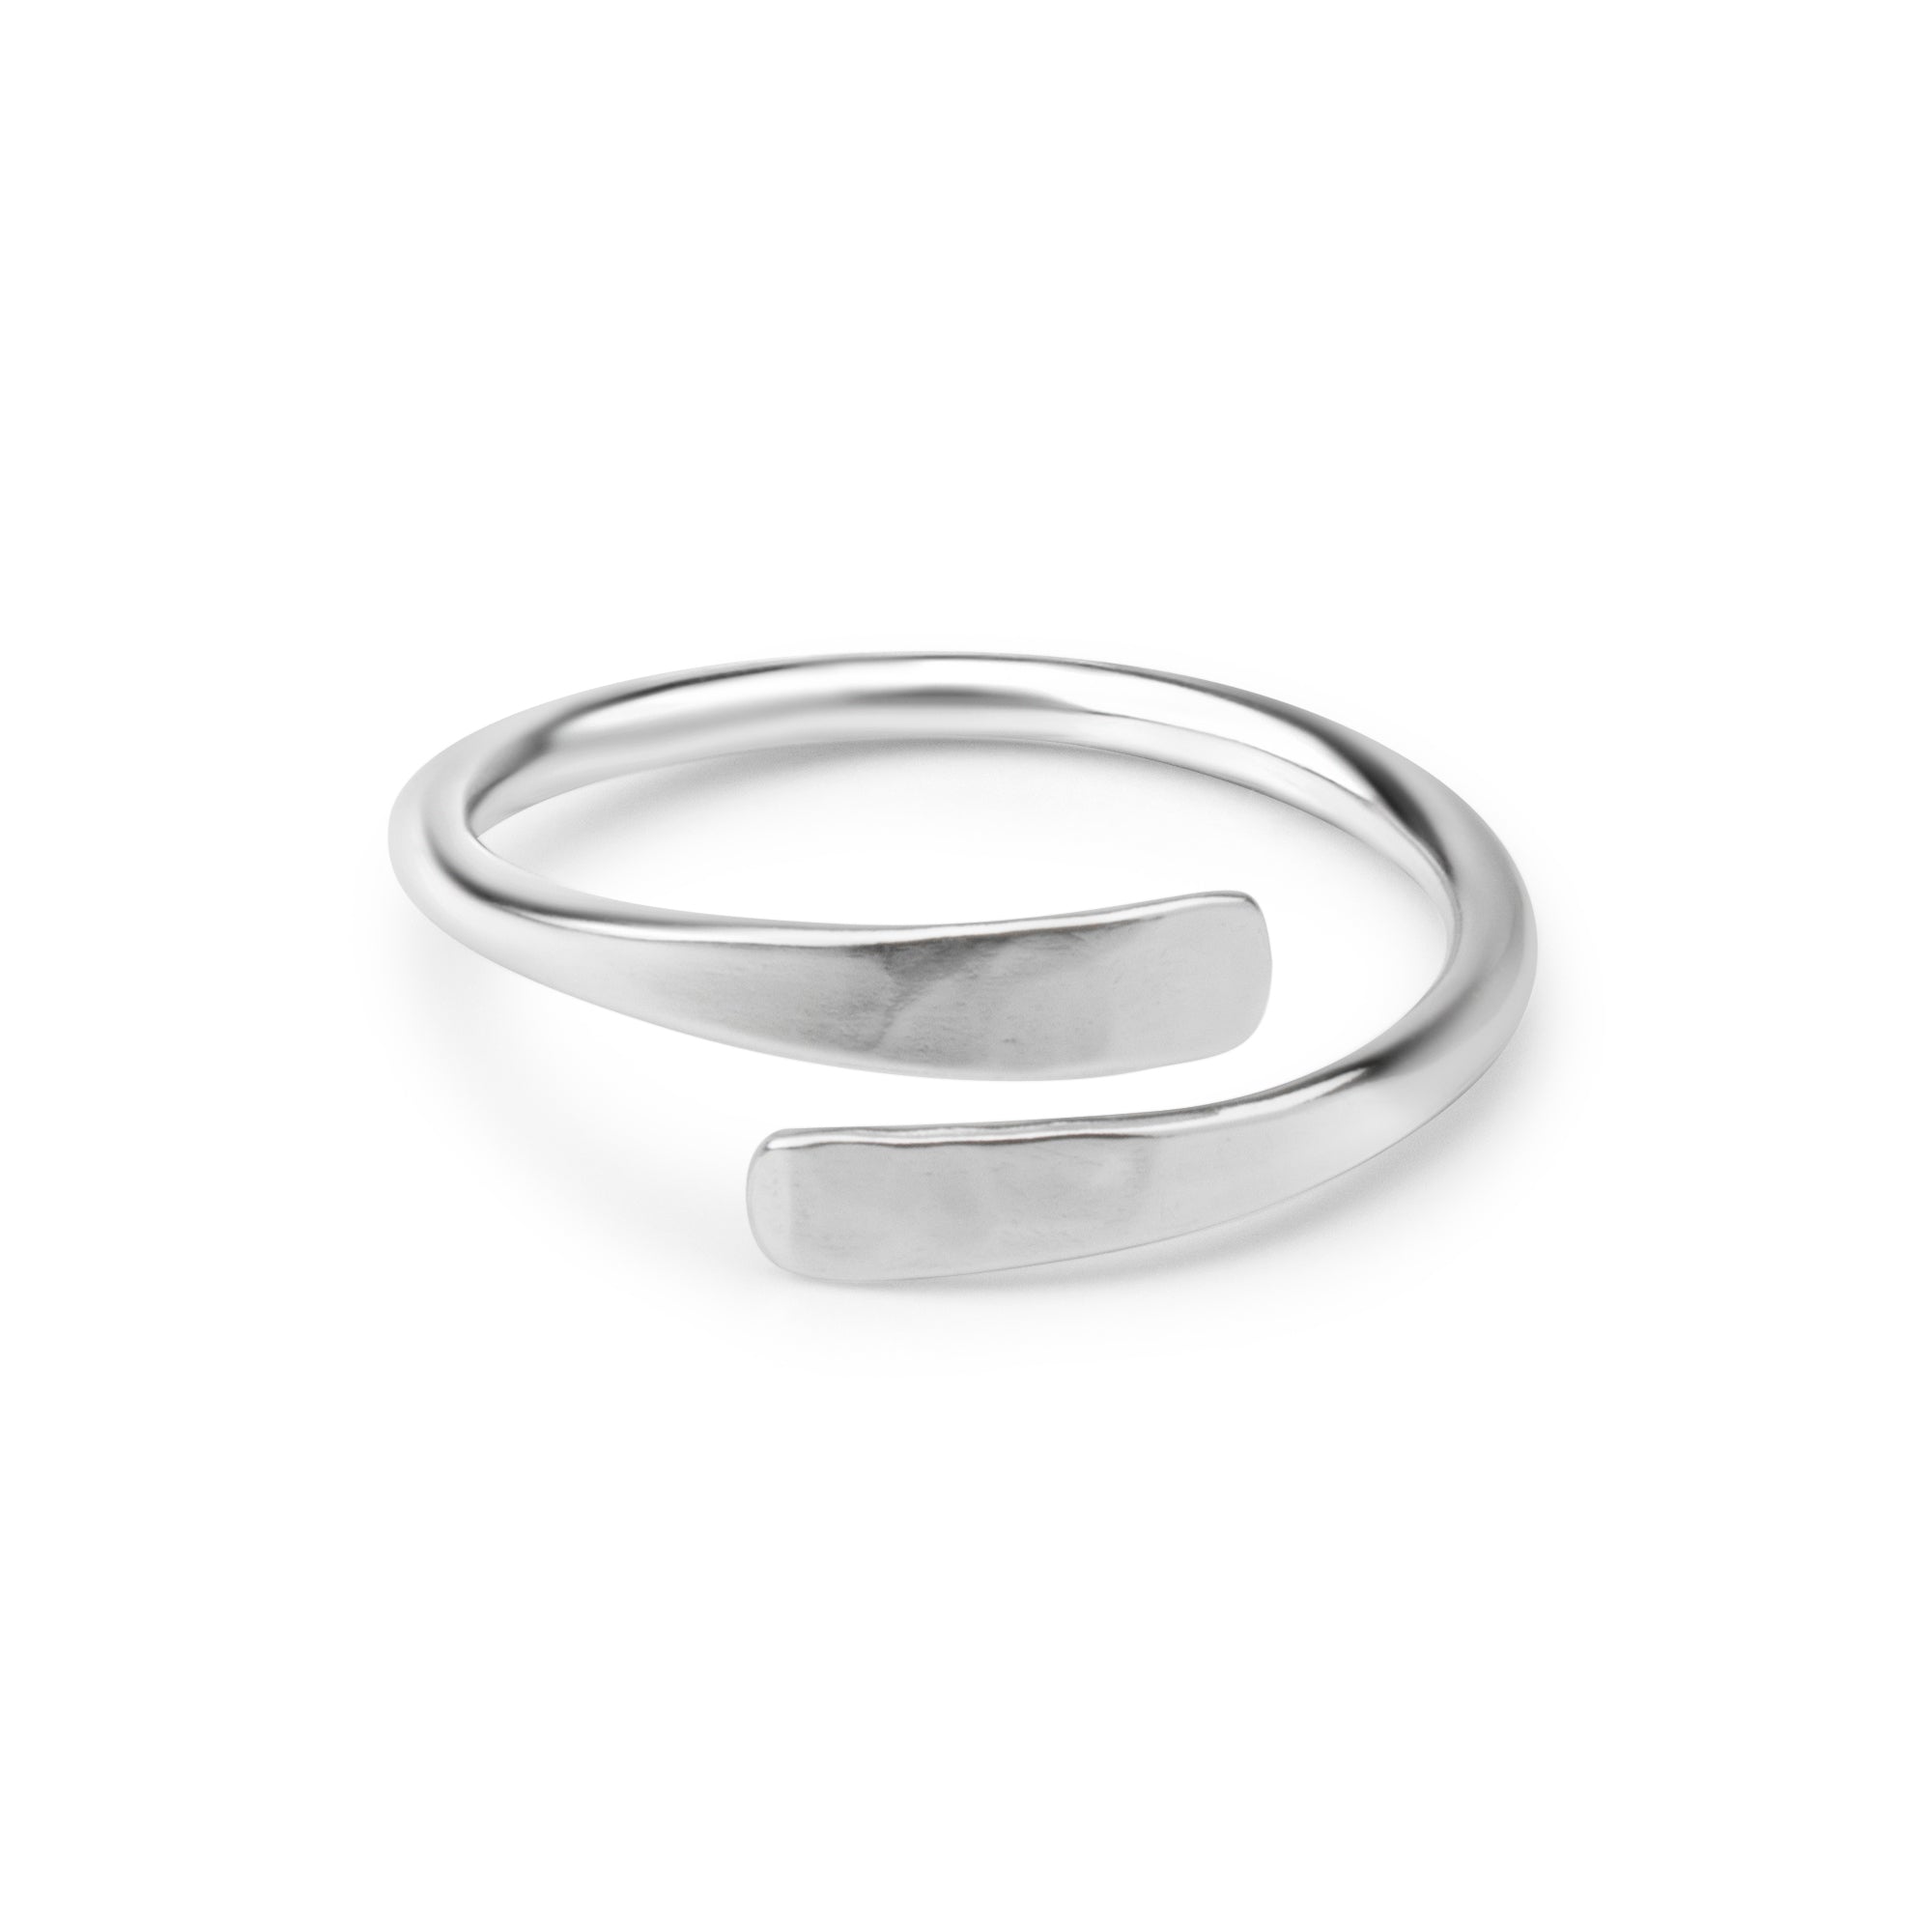 "Equality" Forged Minimalist Open Ring